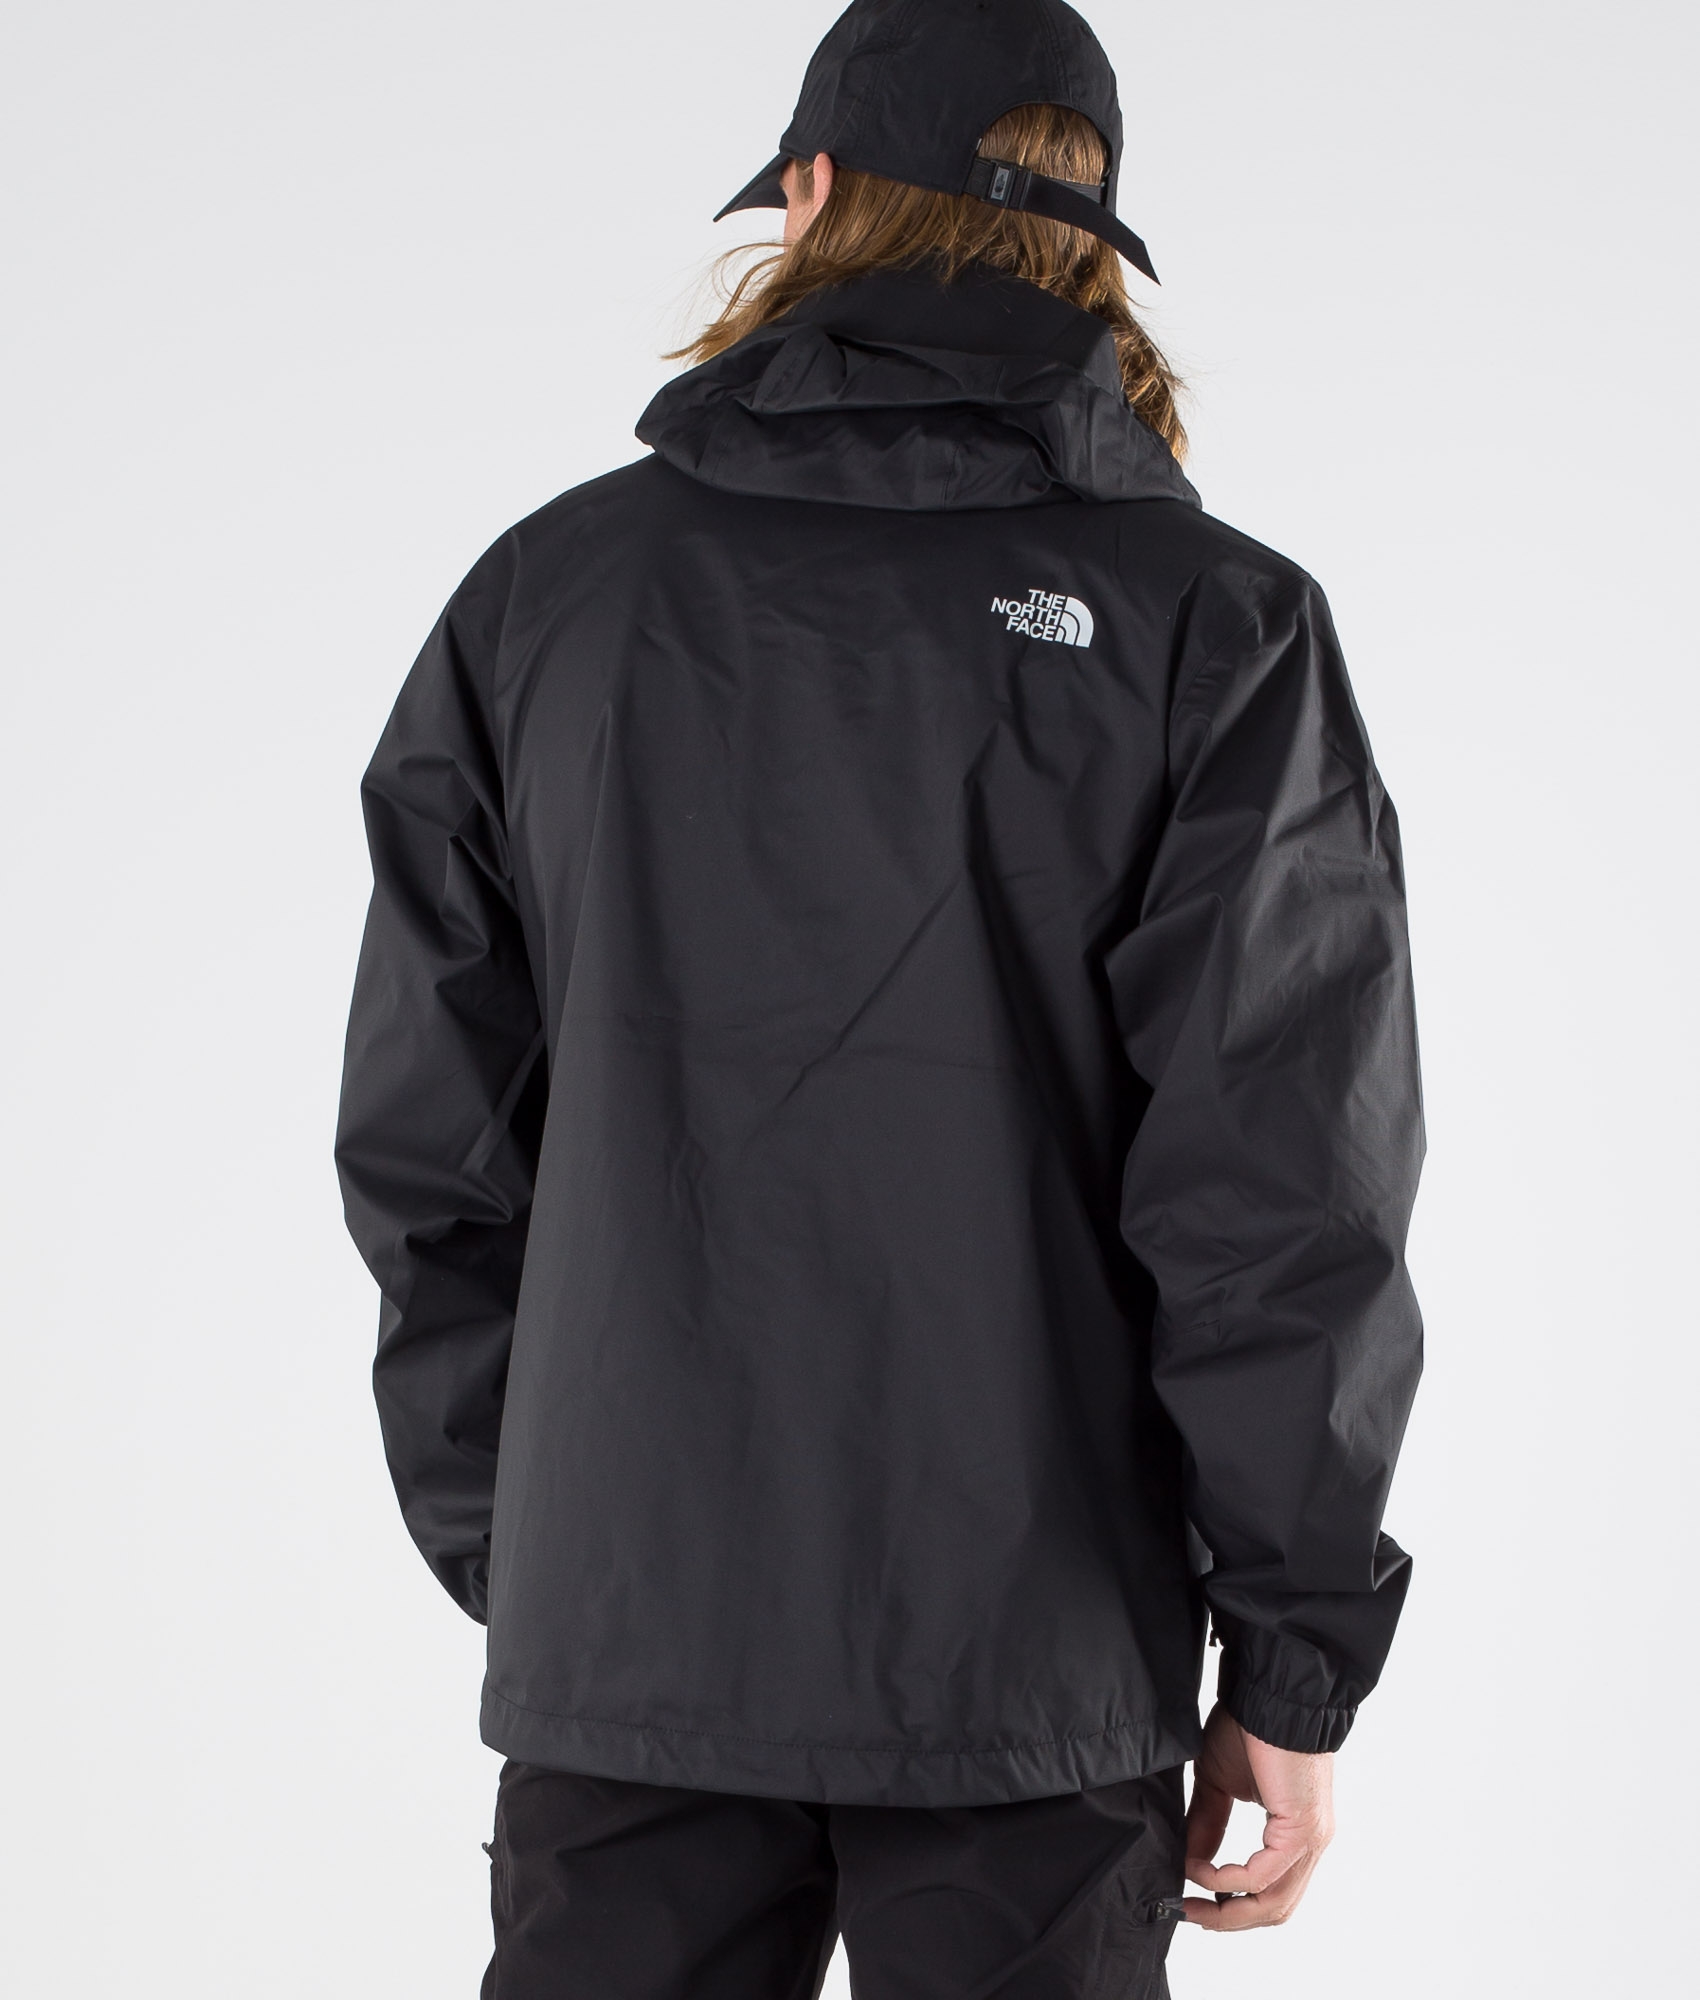 the north face quest waterproof jacket black